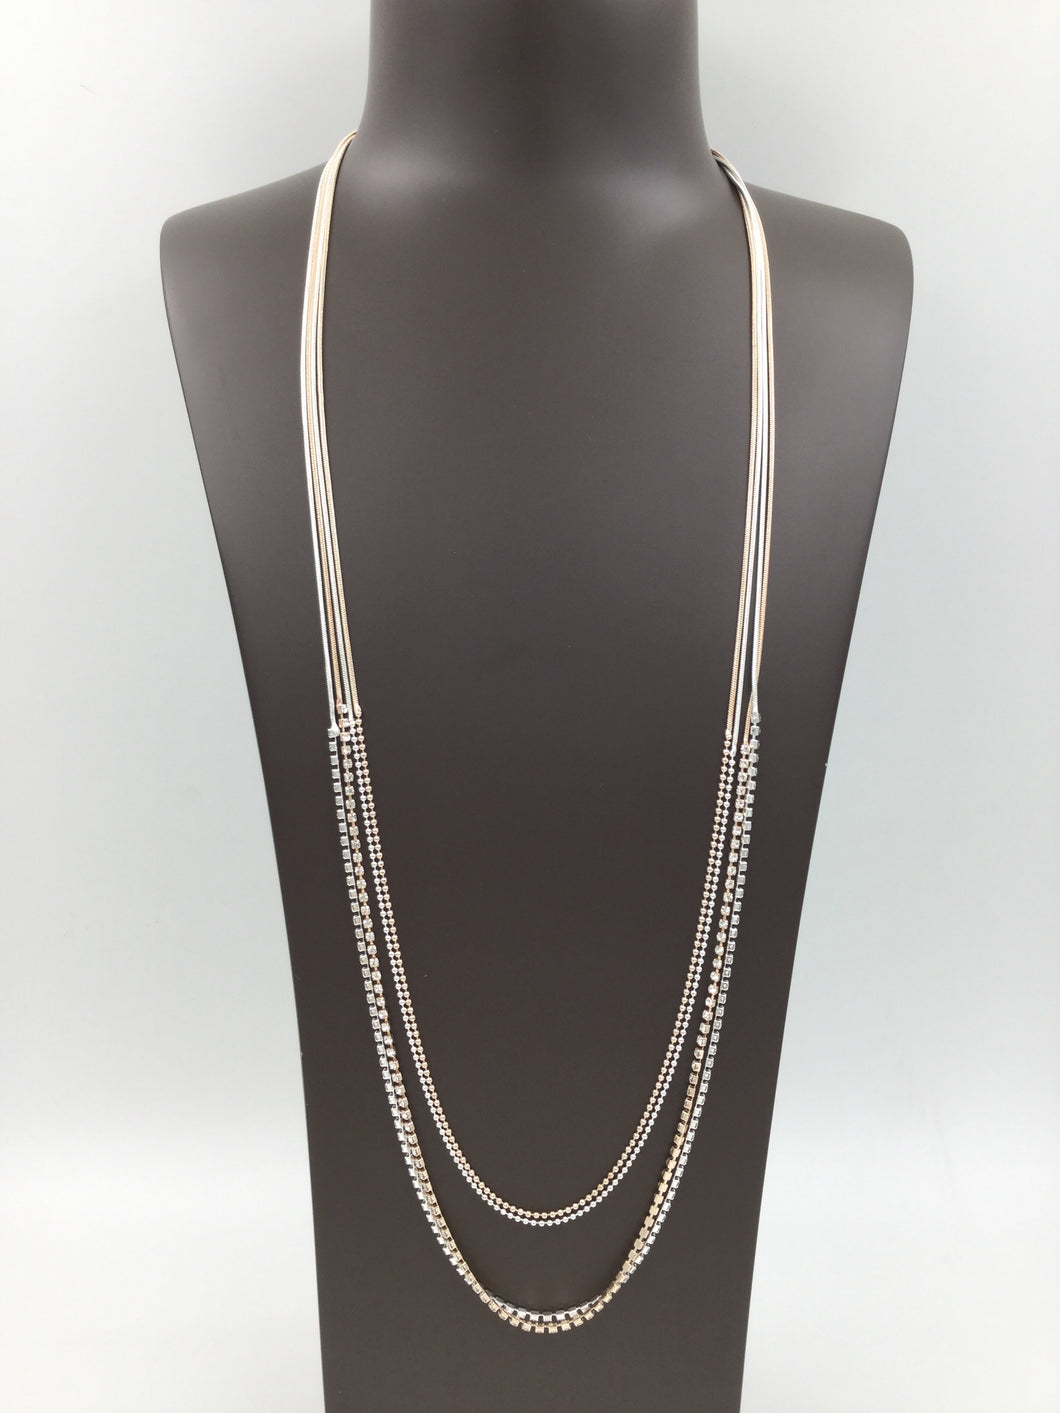 Long Necklace with Three Rows of Chains in Silver and Rose Gold